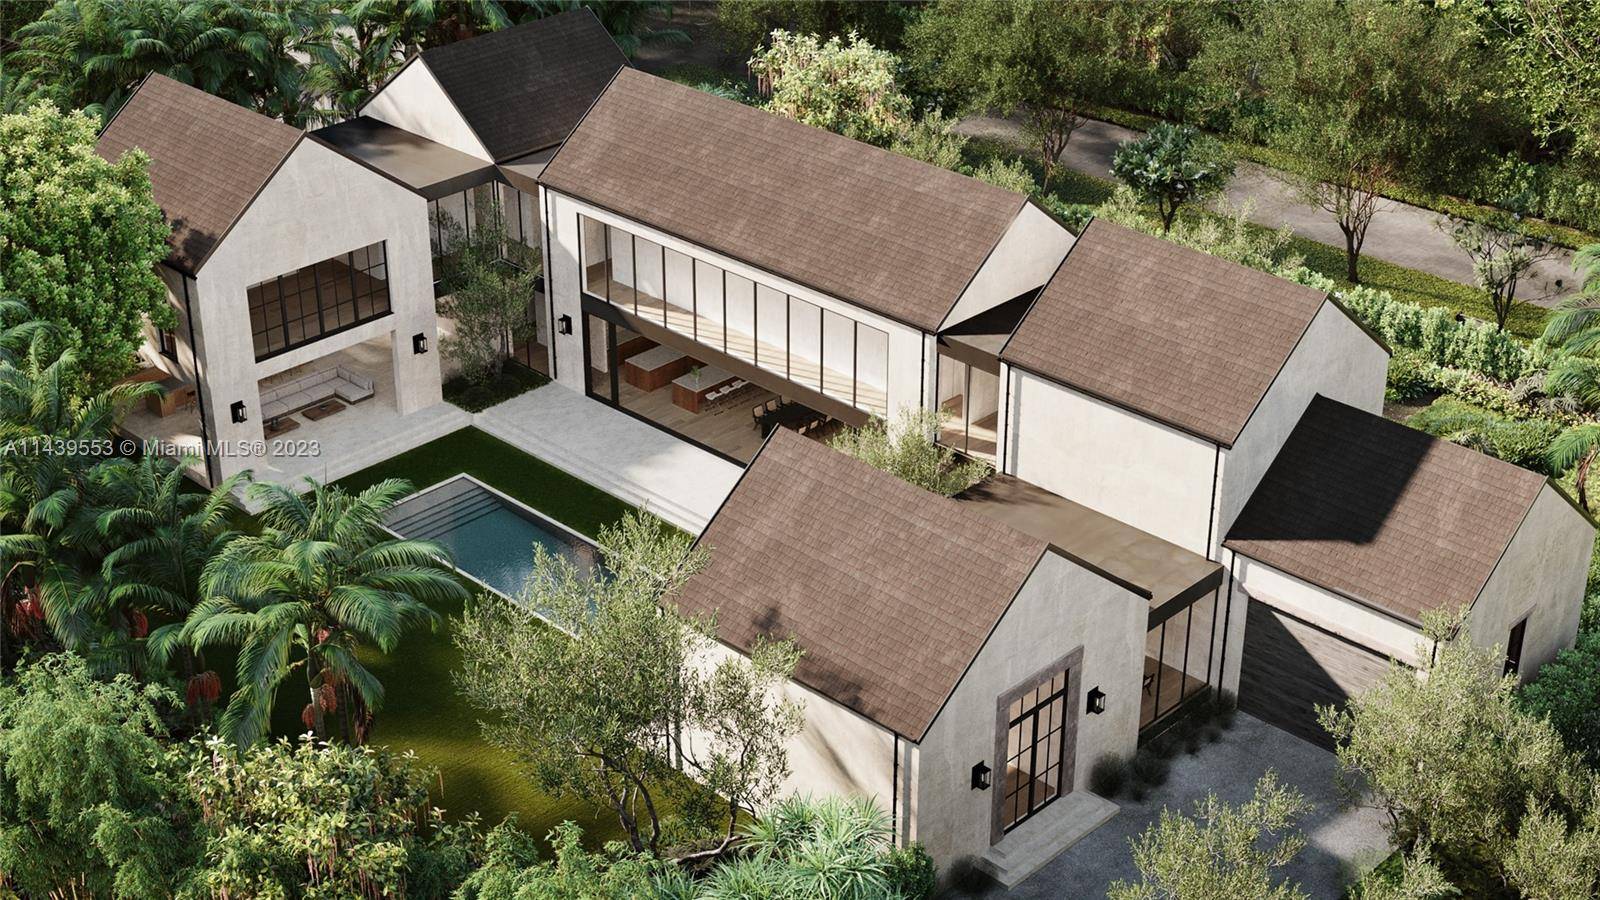 Exquisite Coral Gables residence underway.